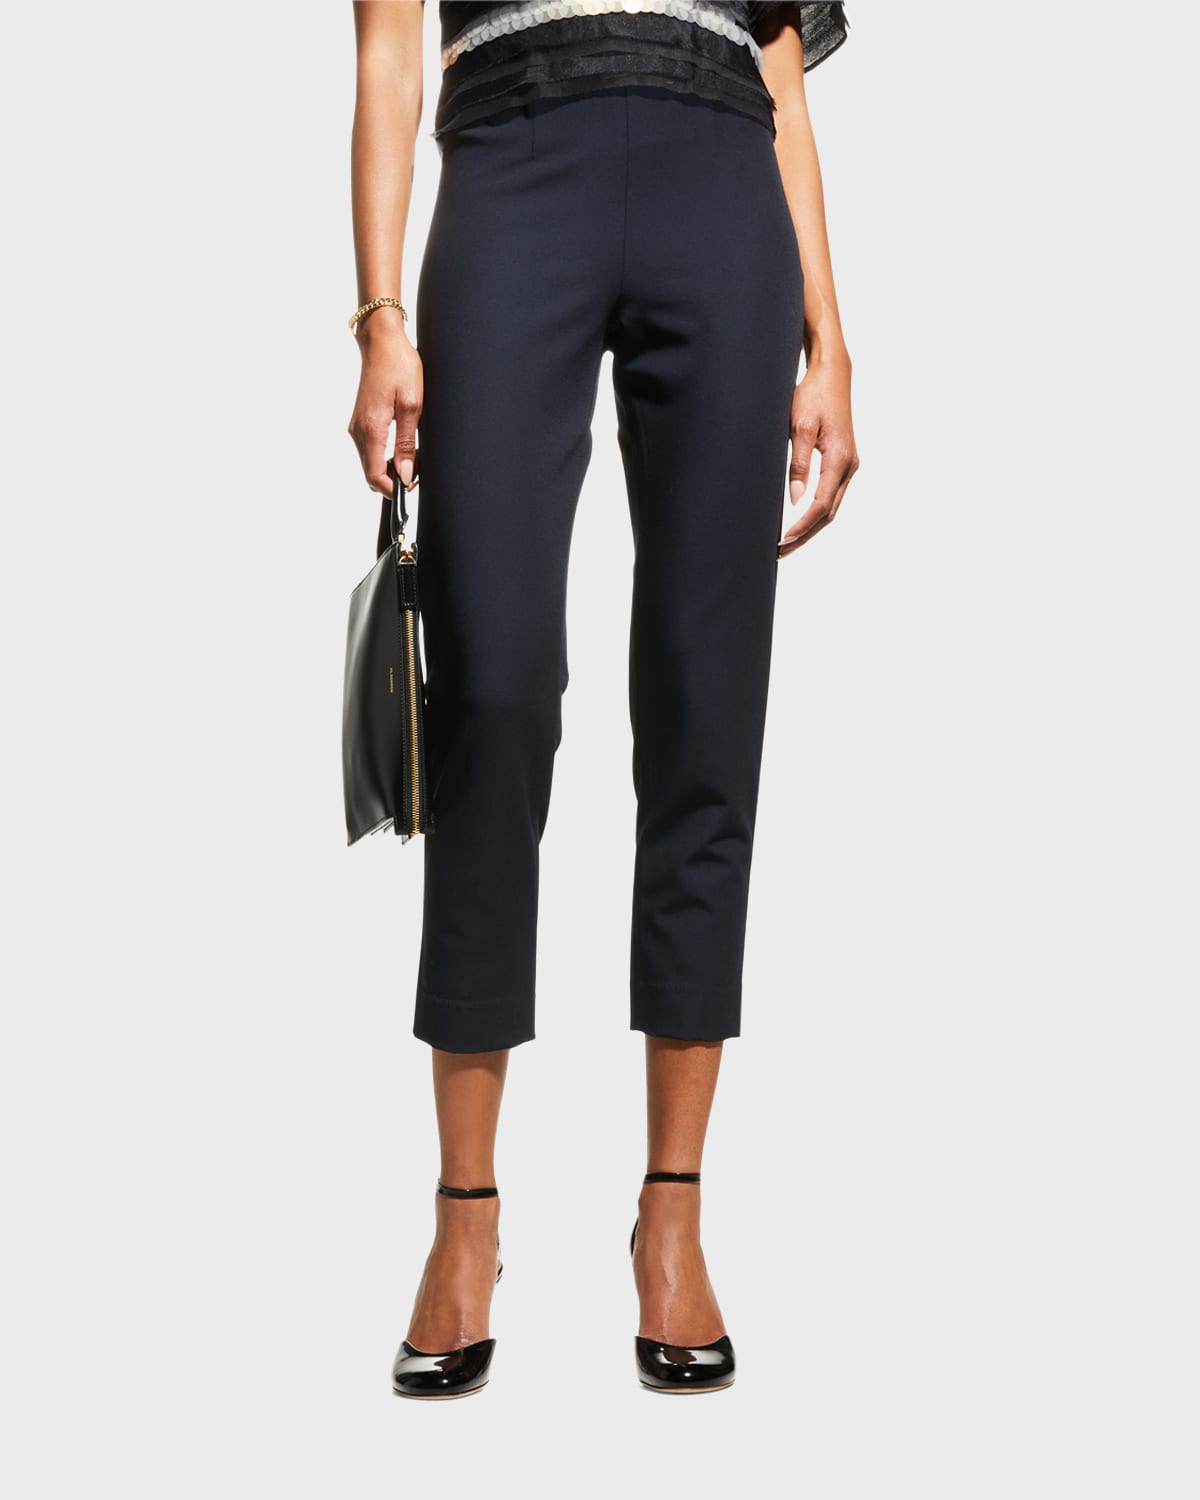 Frances Valentine Lucy Cropped Stretch Straight-Leg Pants